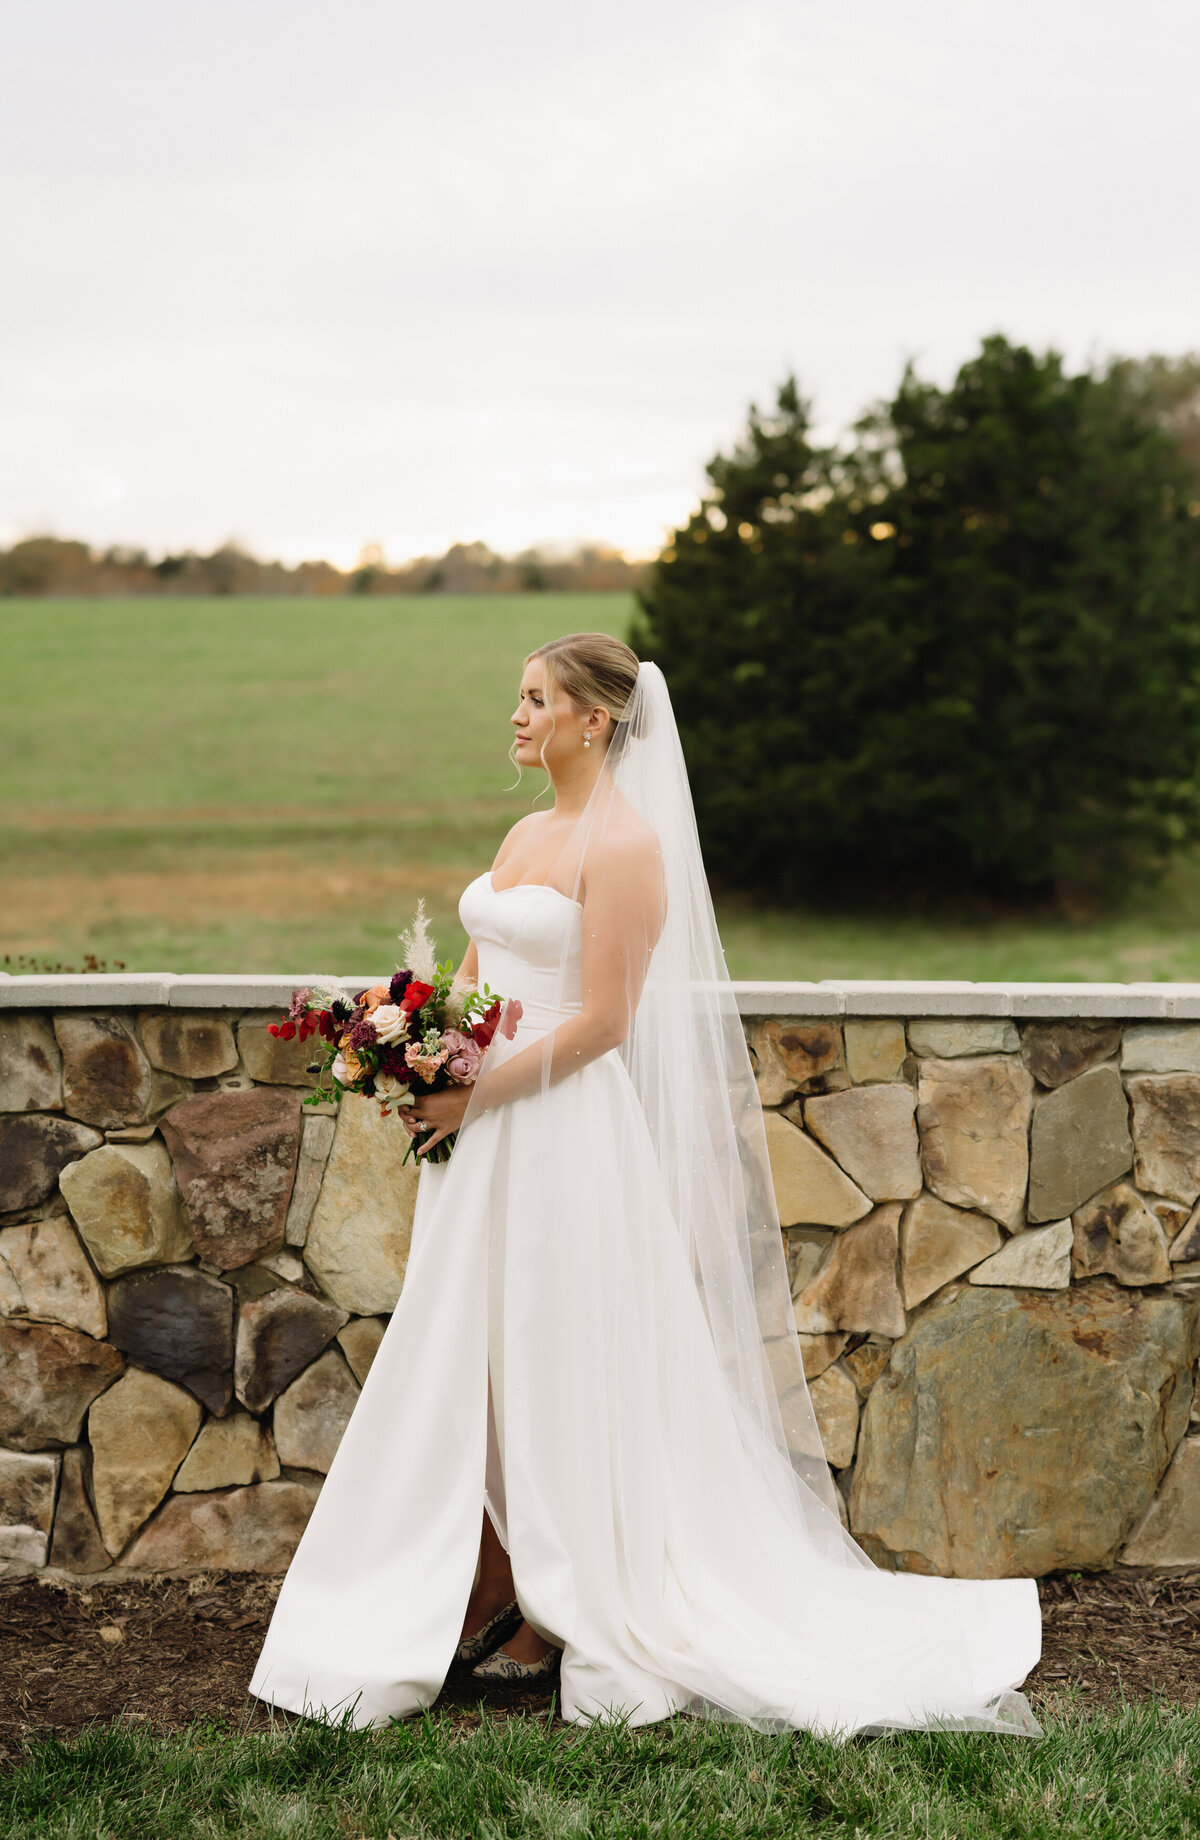 outdoor wedding photo with bride with blonde hair in a bun with her veil flowing behind her as she holds her wedding bouquet with warm reds and pink flowers with a slit on the side of her gown